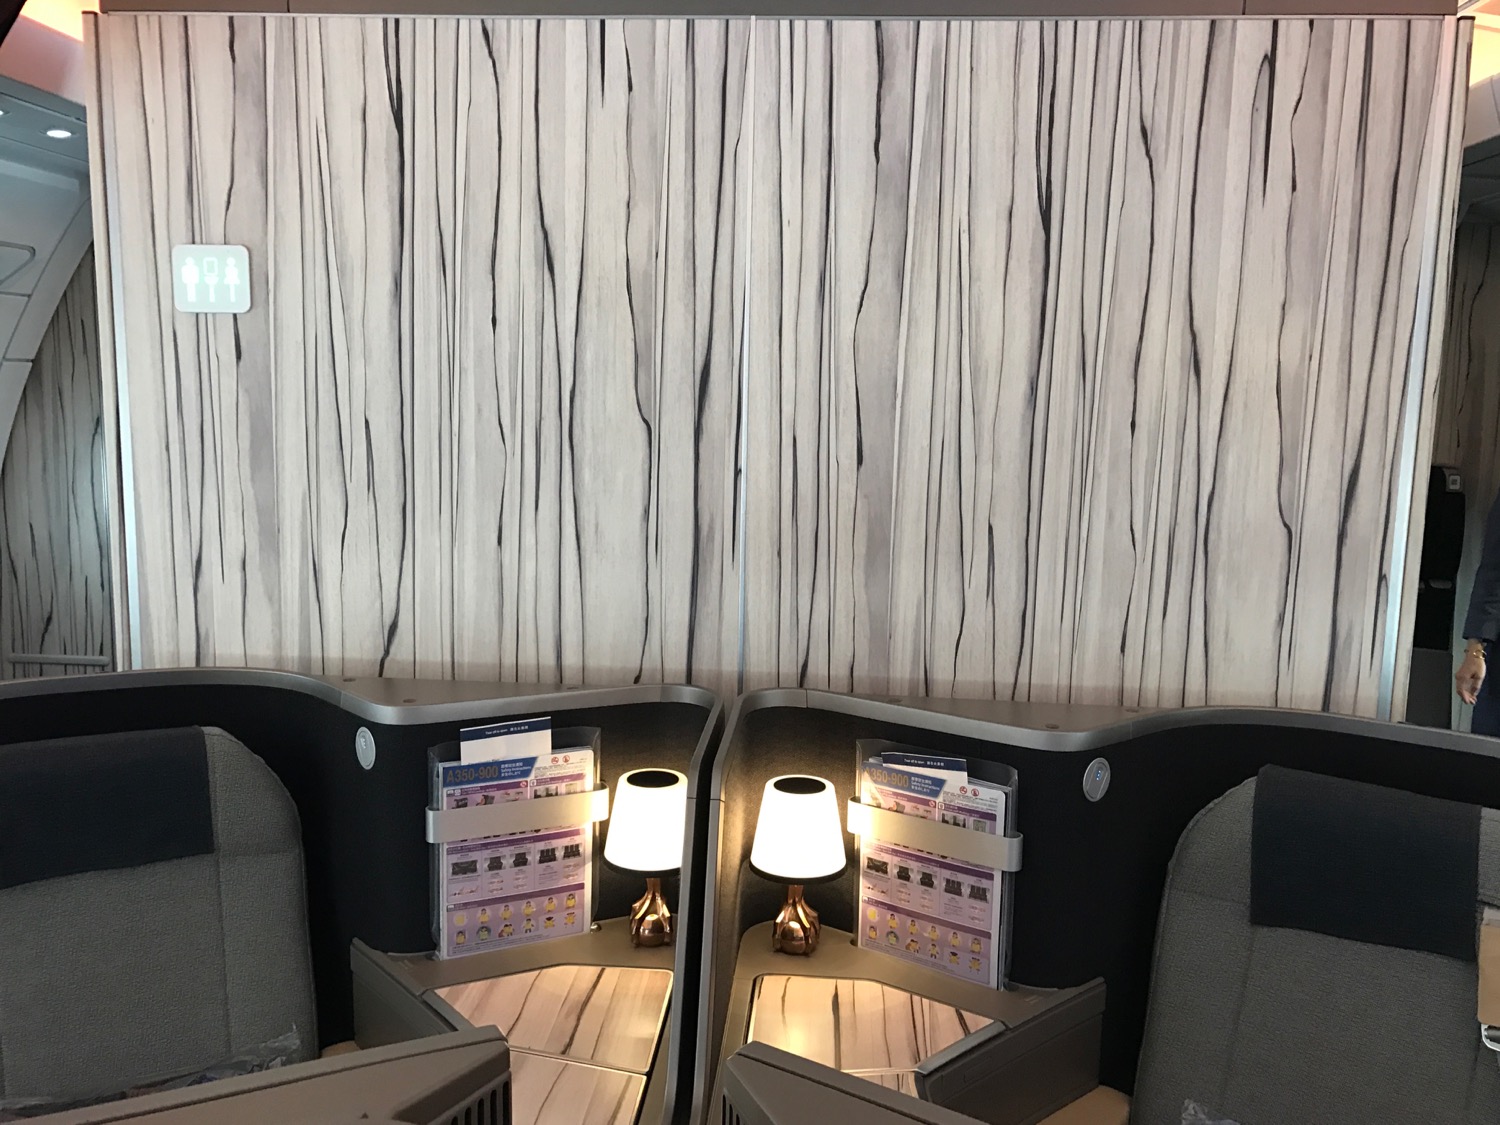 China Airlines A350 Business Class Review - 10